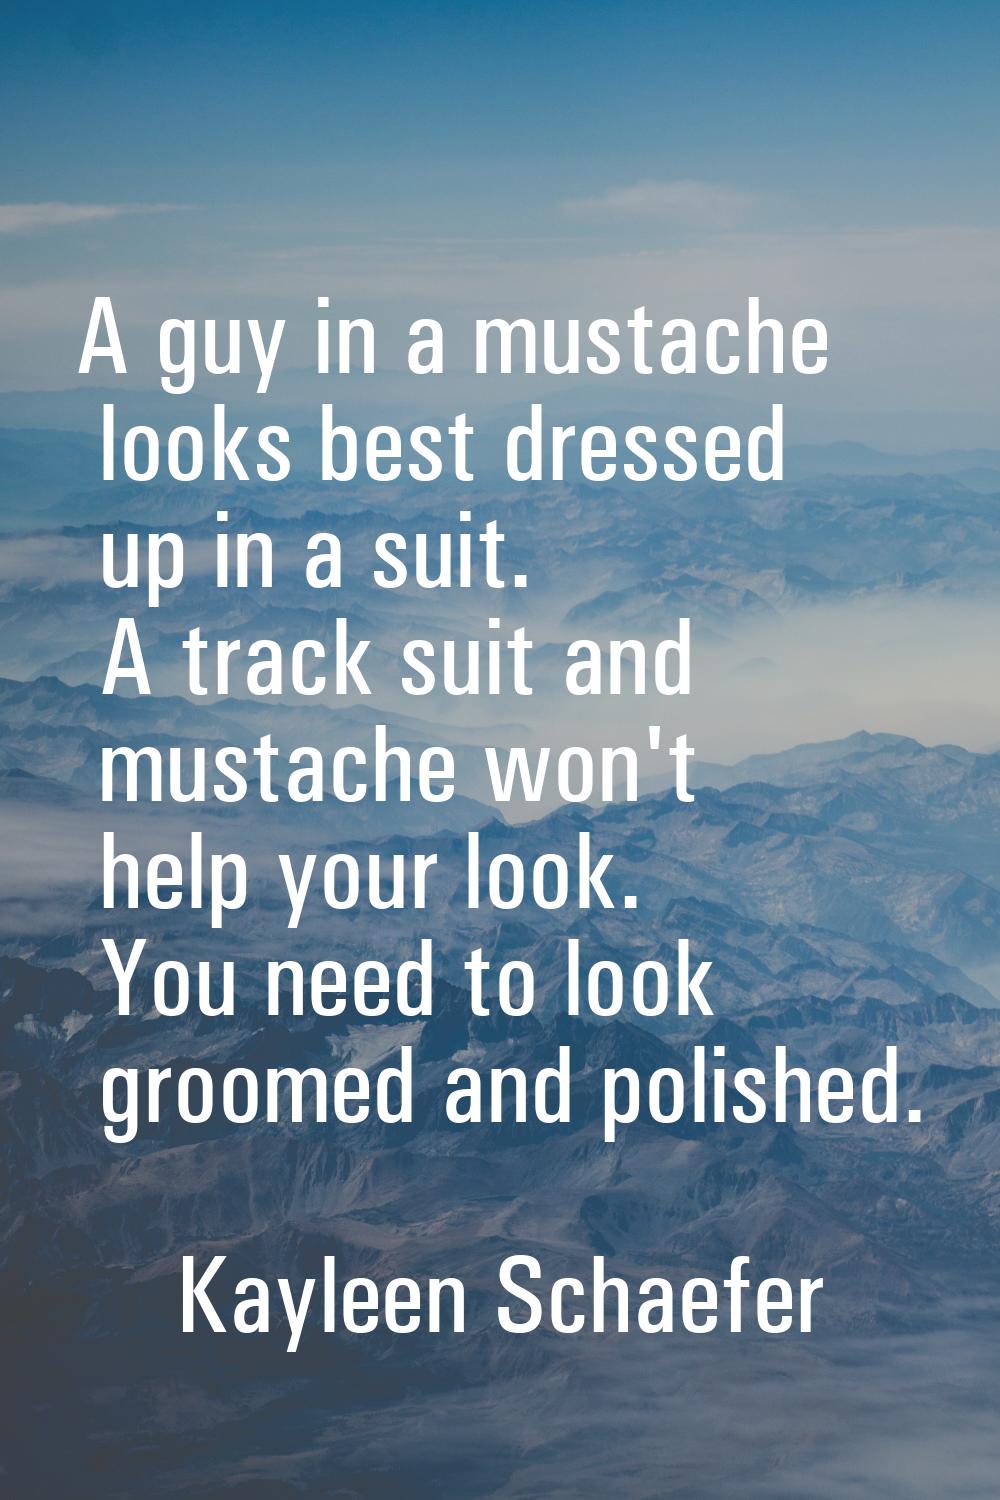 A guy in a mustache looks best dressed up in a suit. A track suit and mustache won't help your look